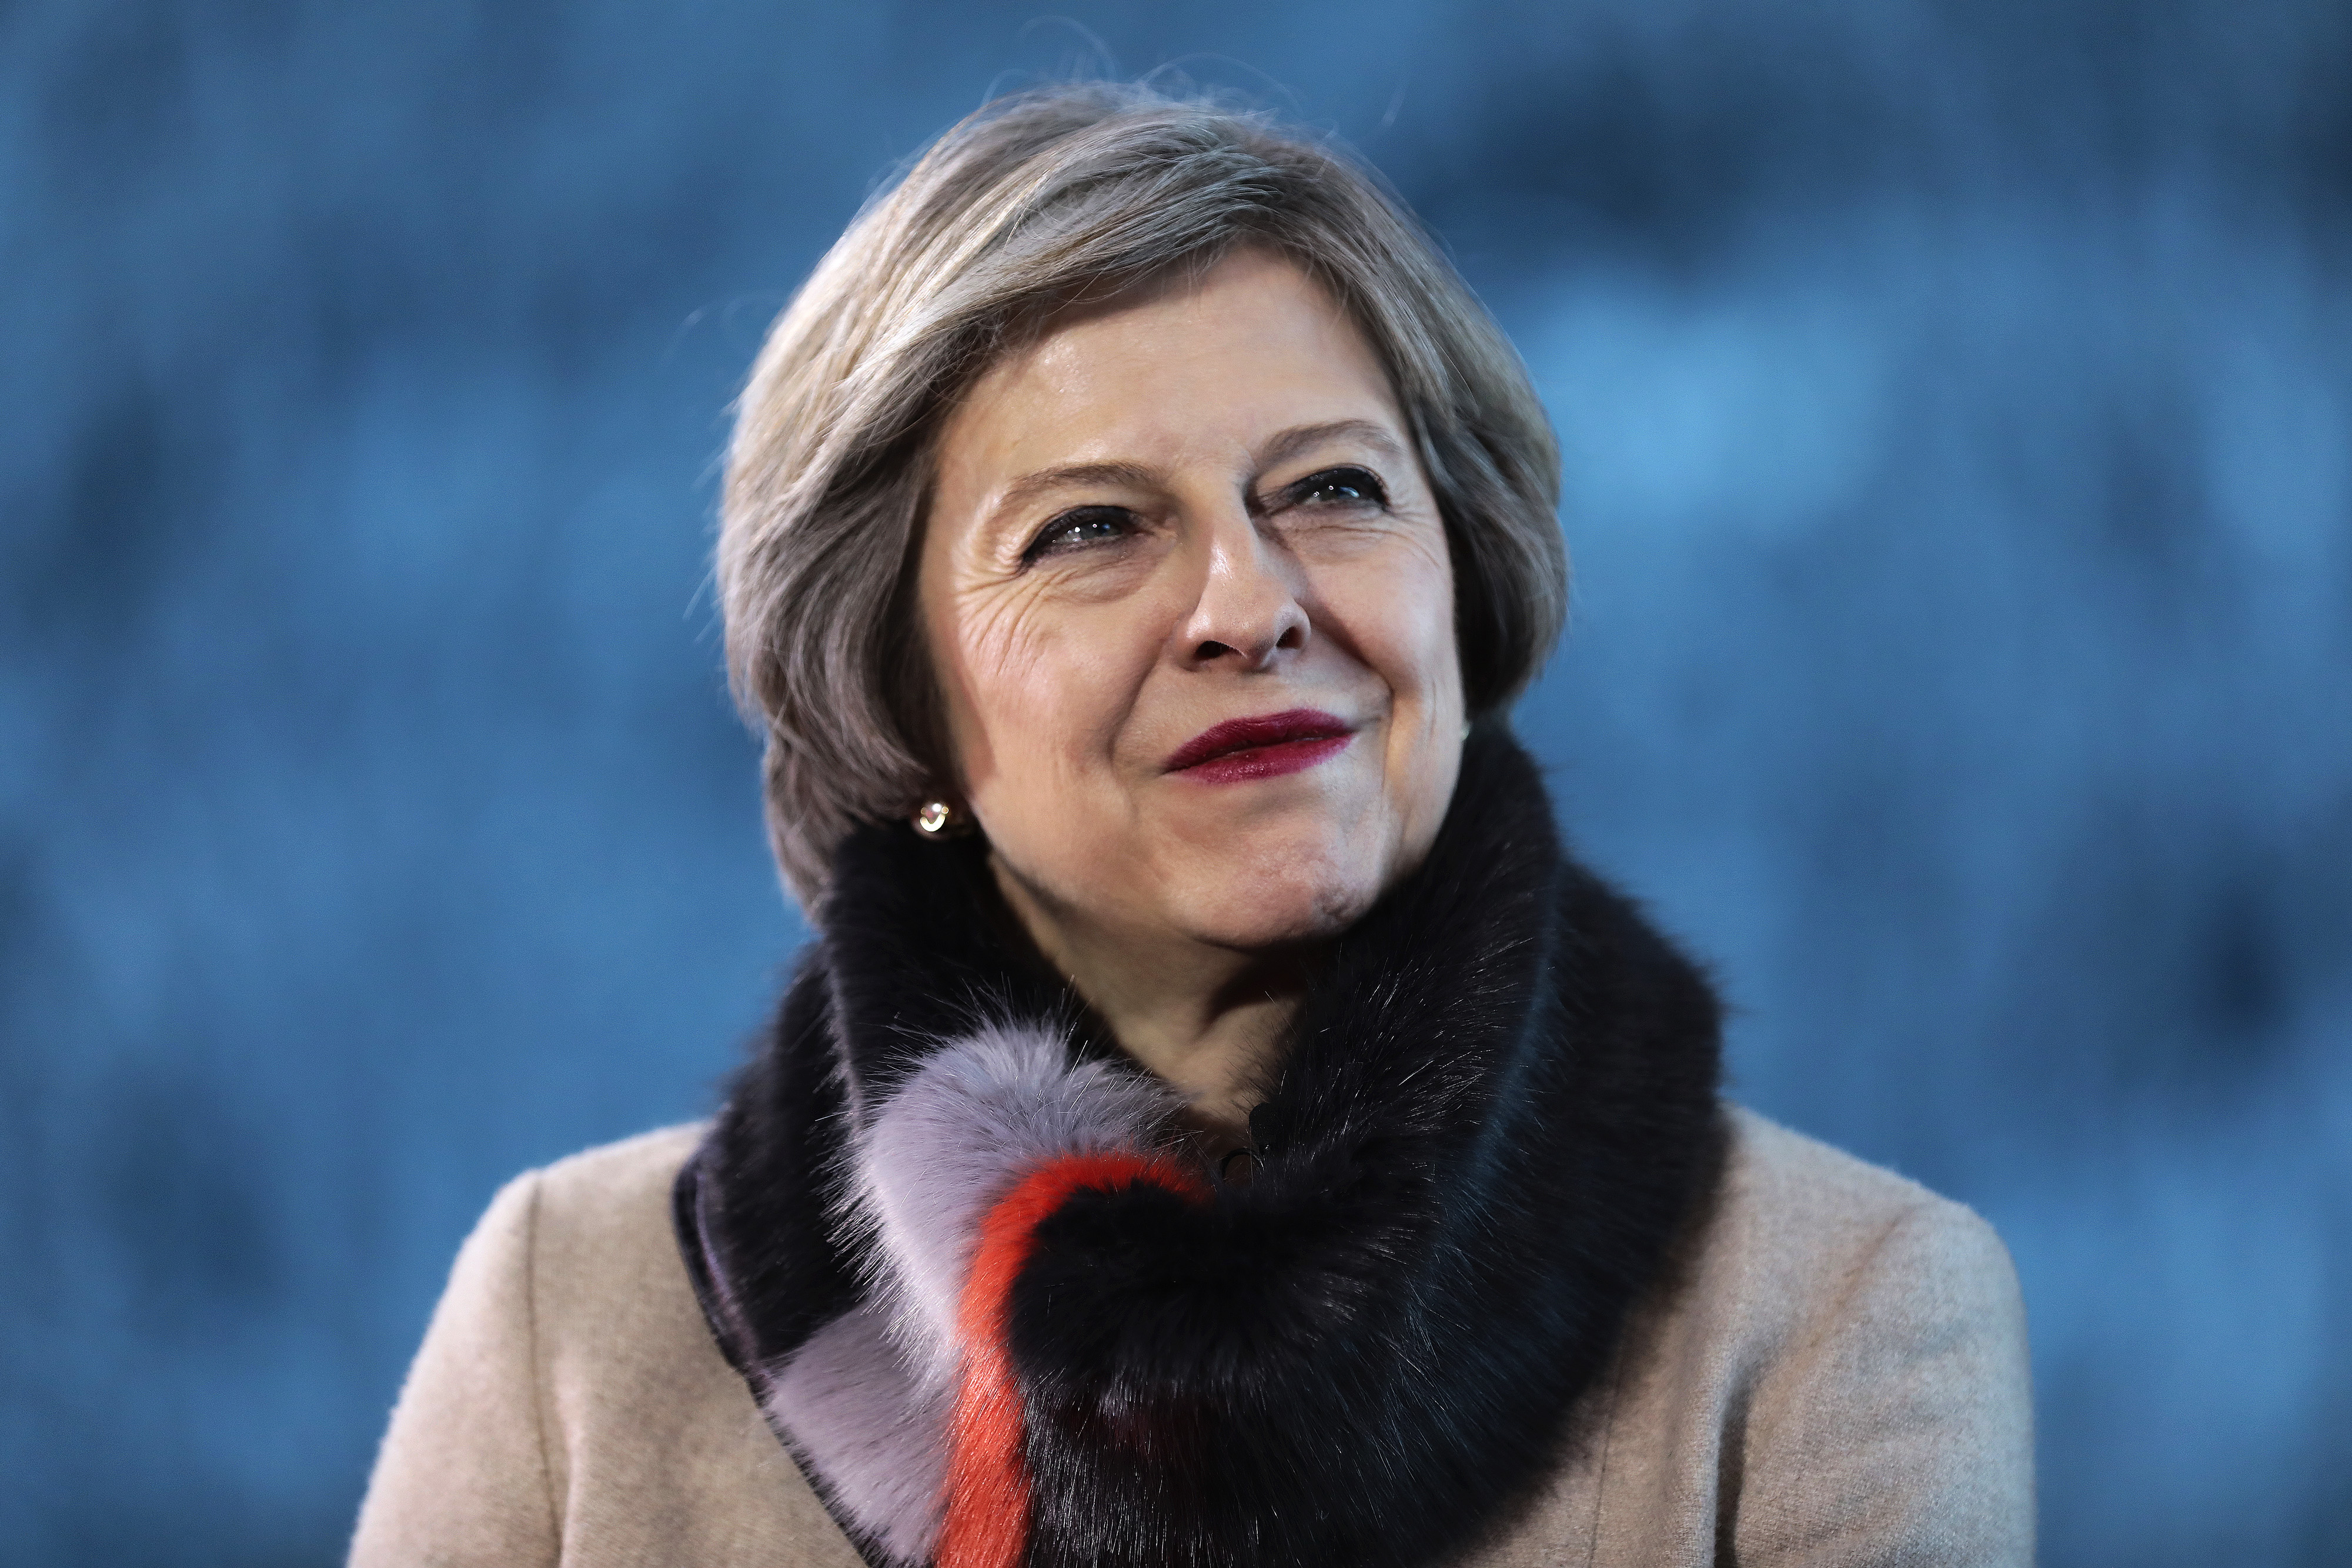 Theresa May, U.K. prime minister, reacts during a Bloomberg Television interview at the World Economic Forum (WEF) in Davos, Switzerland, on Thursday, Jan. 19, 2017. World leaders, influential executives, bankers and policy makers attend the 47th annual meeting of the World Economic Forum in Davos from Jan. 17 - 20. (Simon Dawson—Bloomberg/Getty Images)